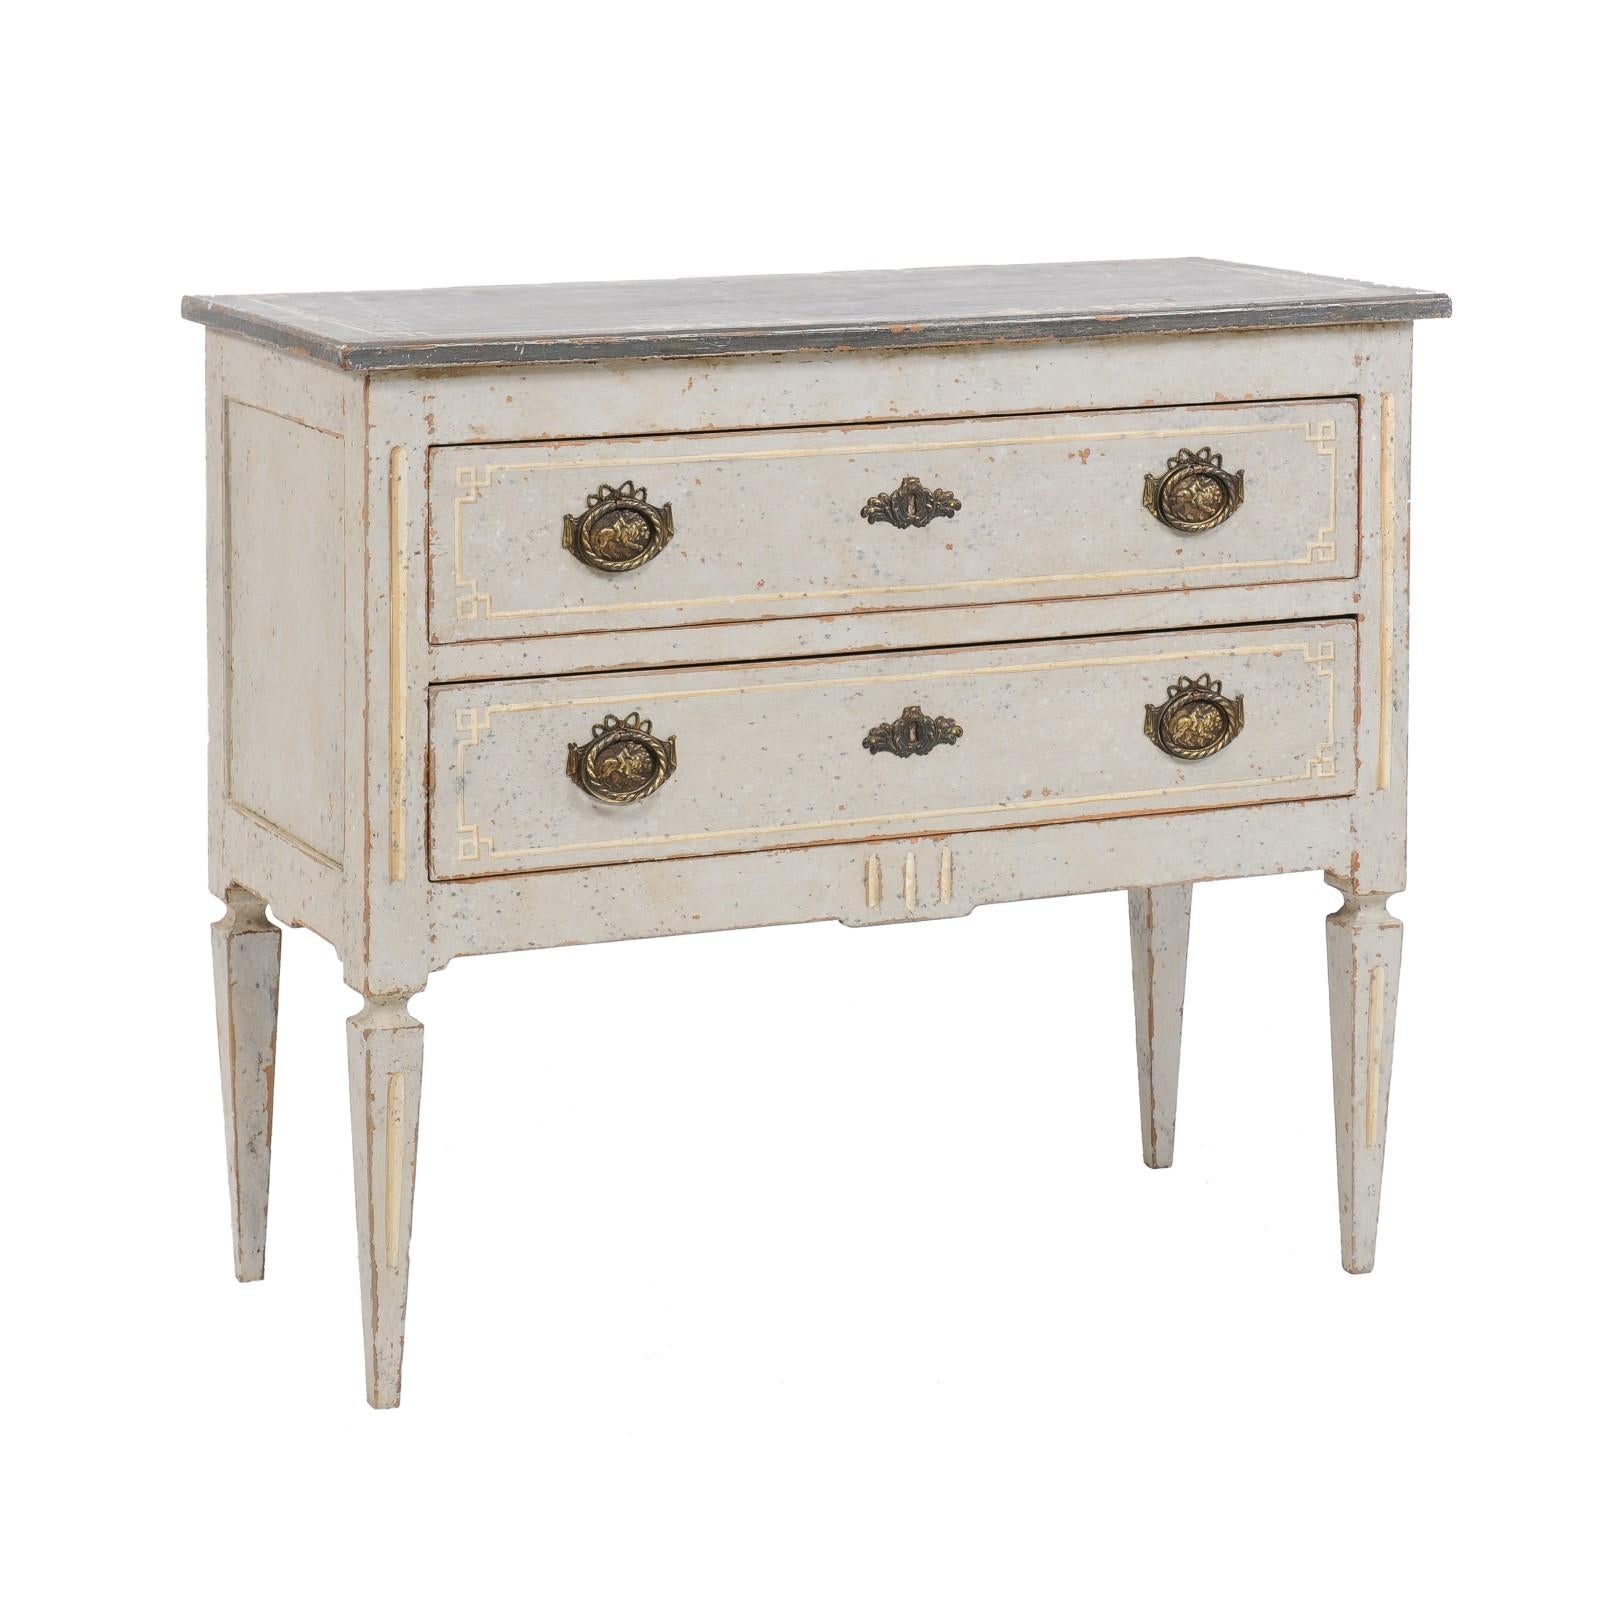 French Louis XVI Style Painted Two-Drawer Commode from the Late 19th Century